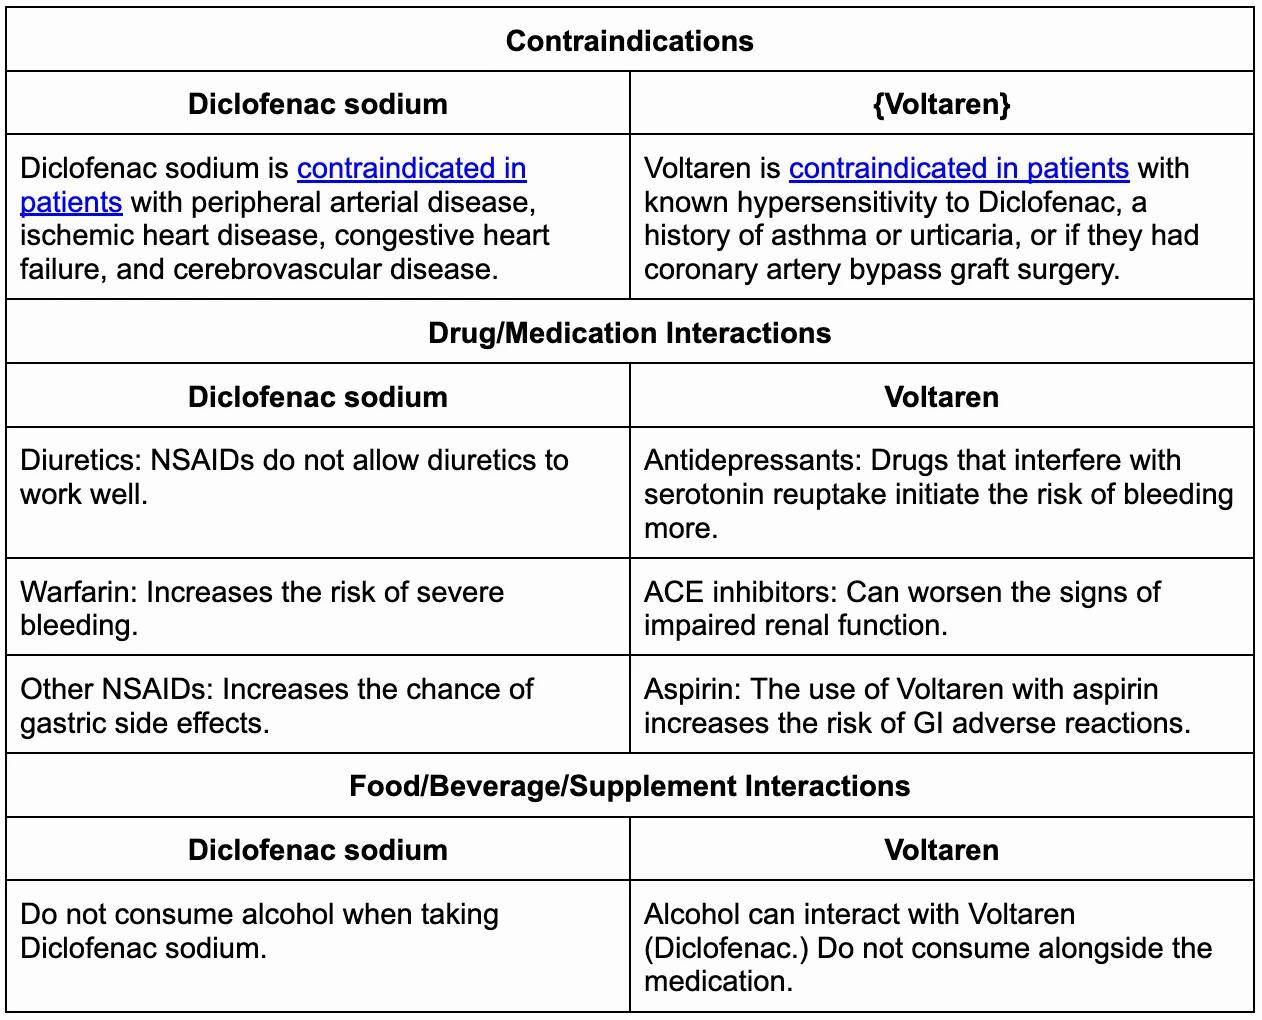 Contraindications, drug/medication interactions, and food/beverage/supplement interactions for the medications Diclofenac sodium and Voltaren.